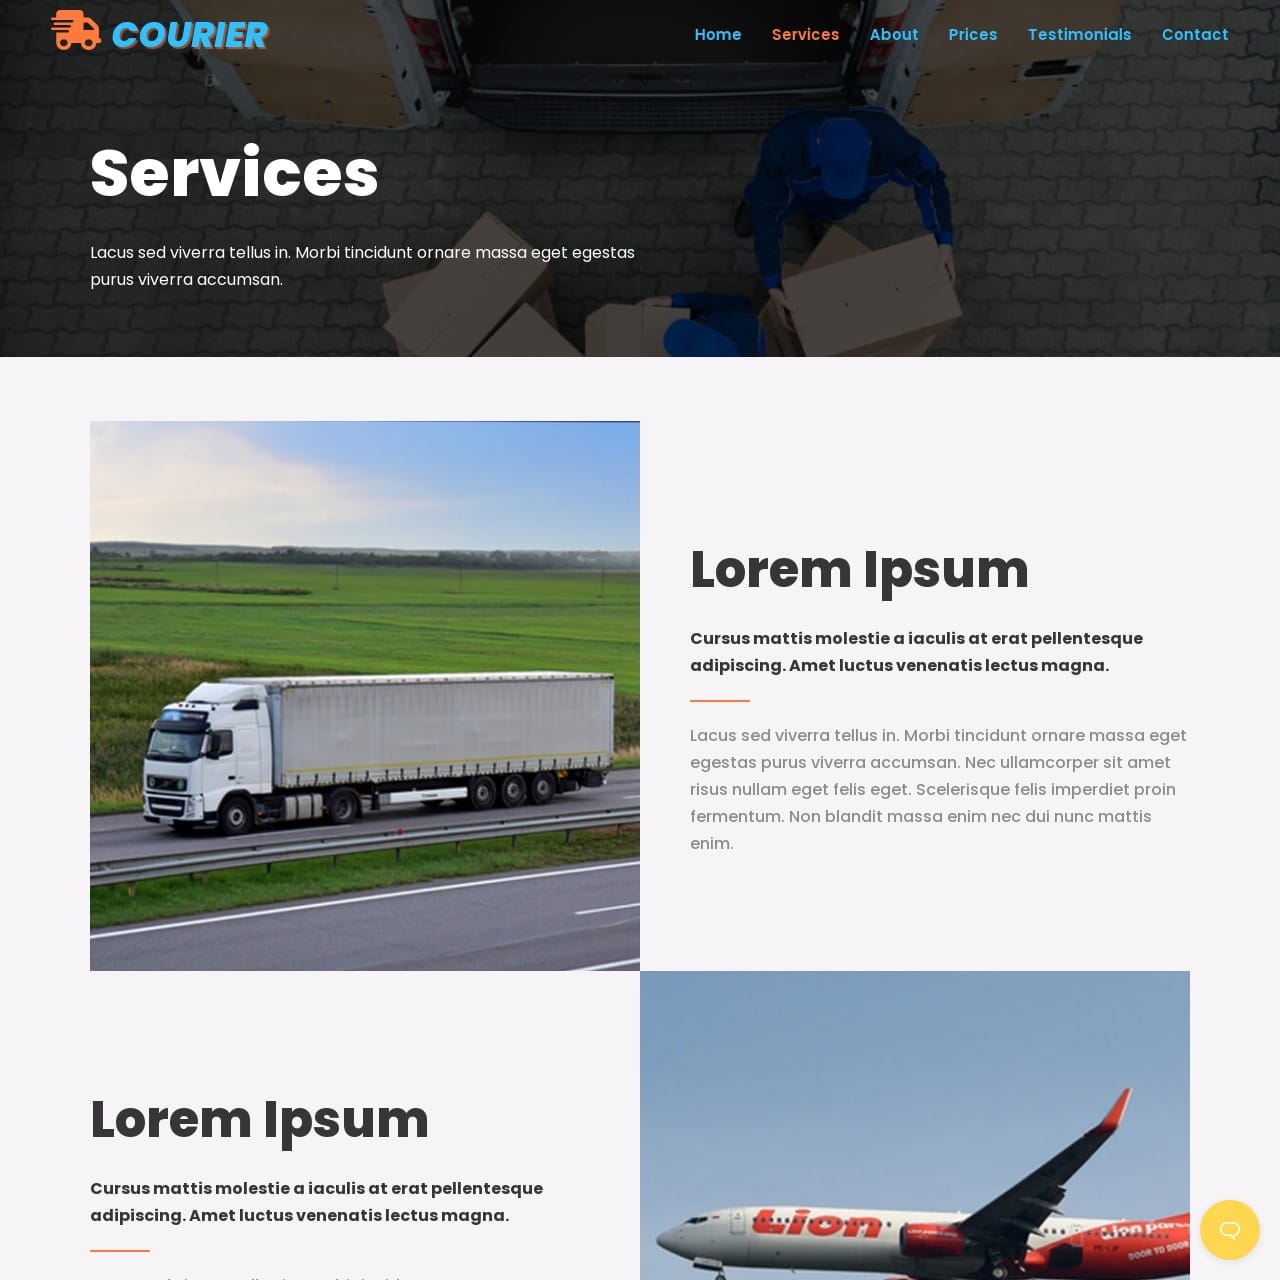 Courier Service Template - Services Page